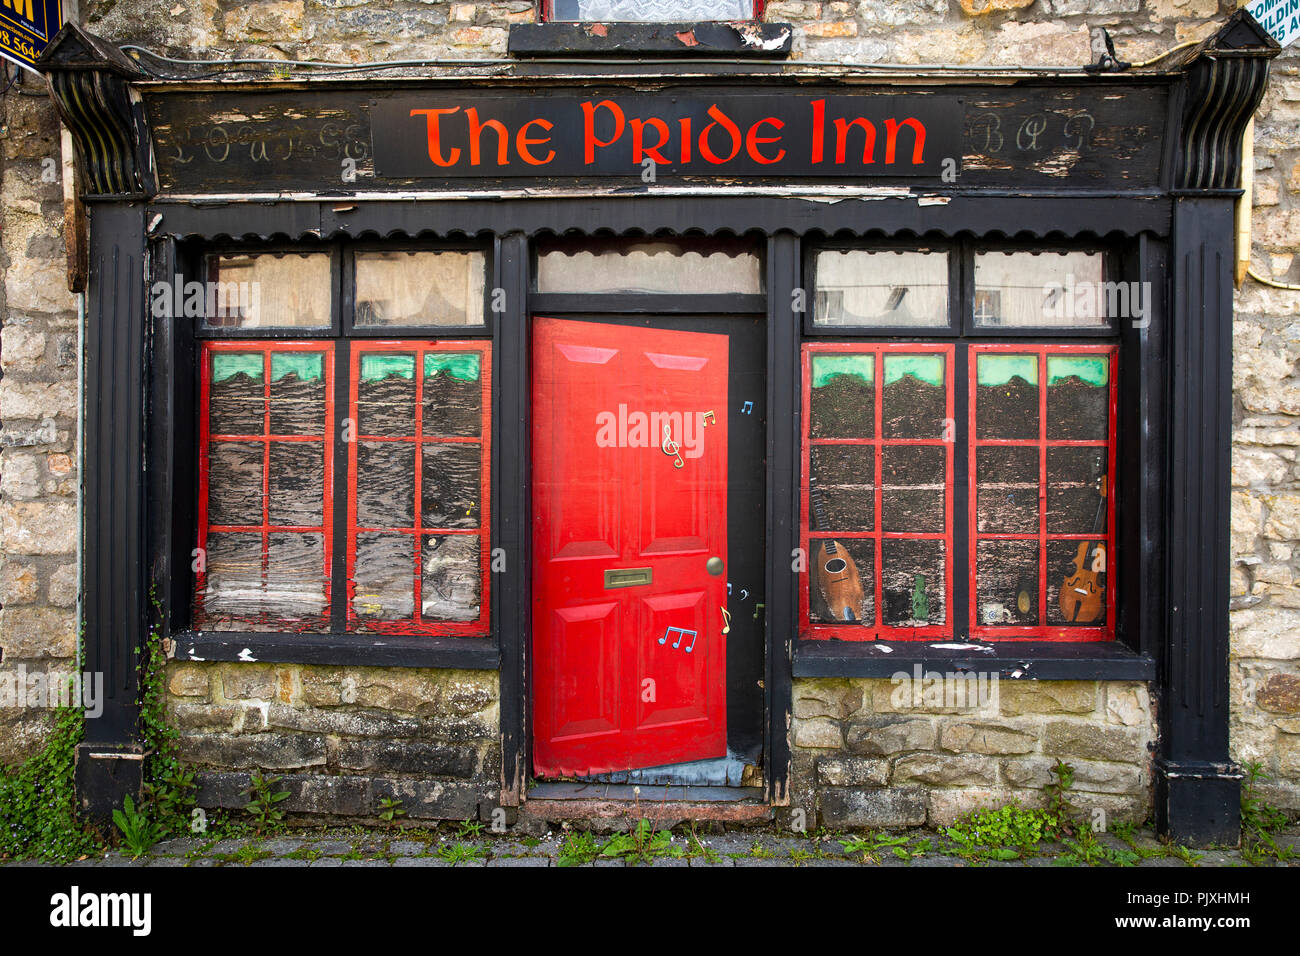 Ireland, Co Leitrim, Drumshanbo, The Pride Inn, trompe d’oeil bar front with open door and music coming out, painting on empty building Stock Photo